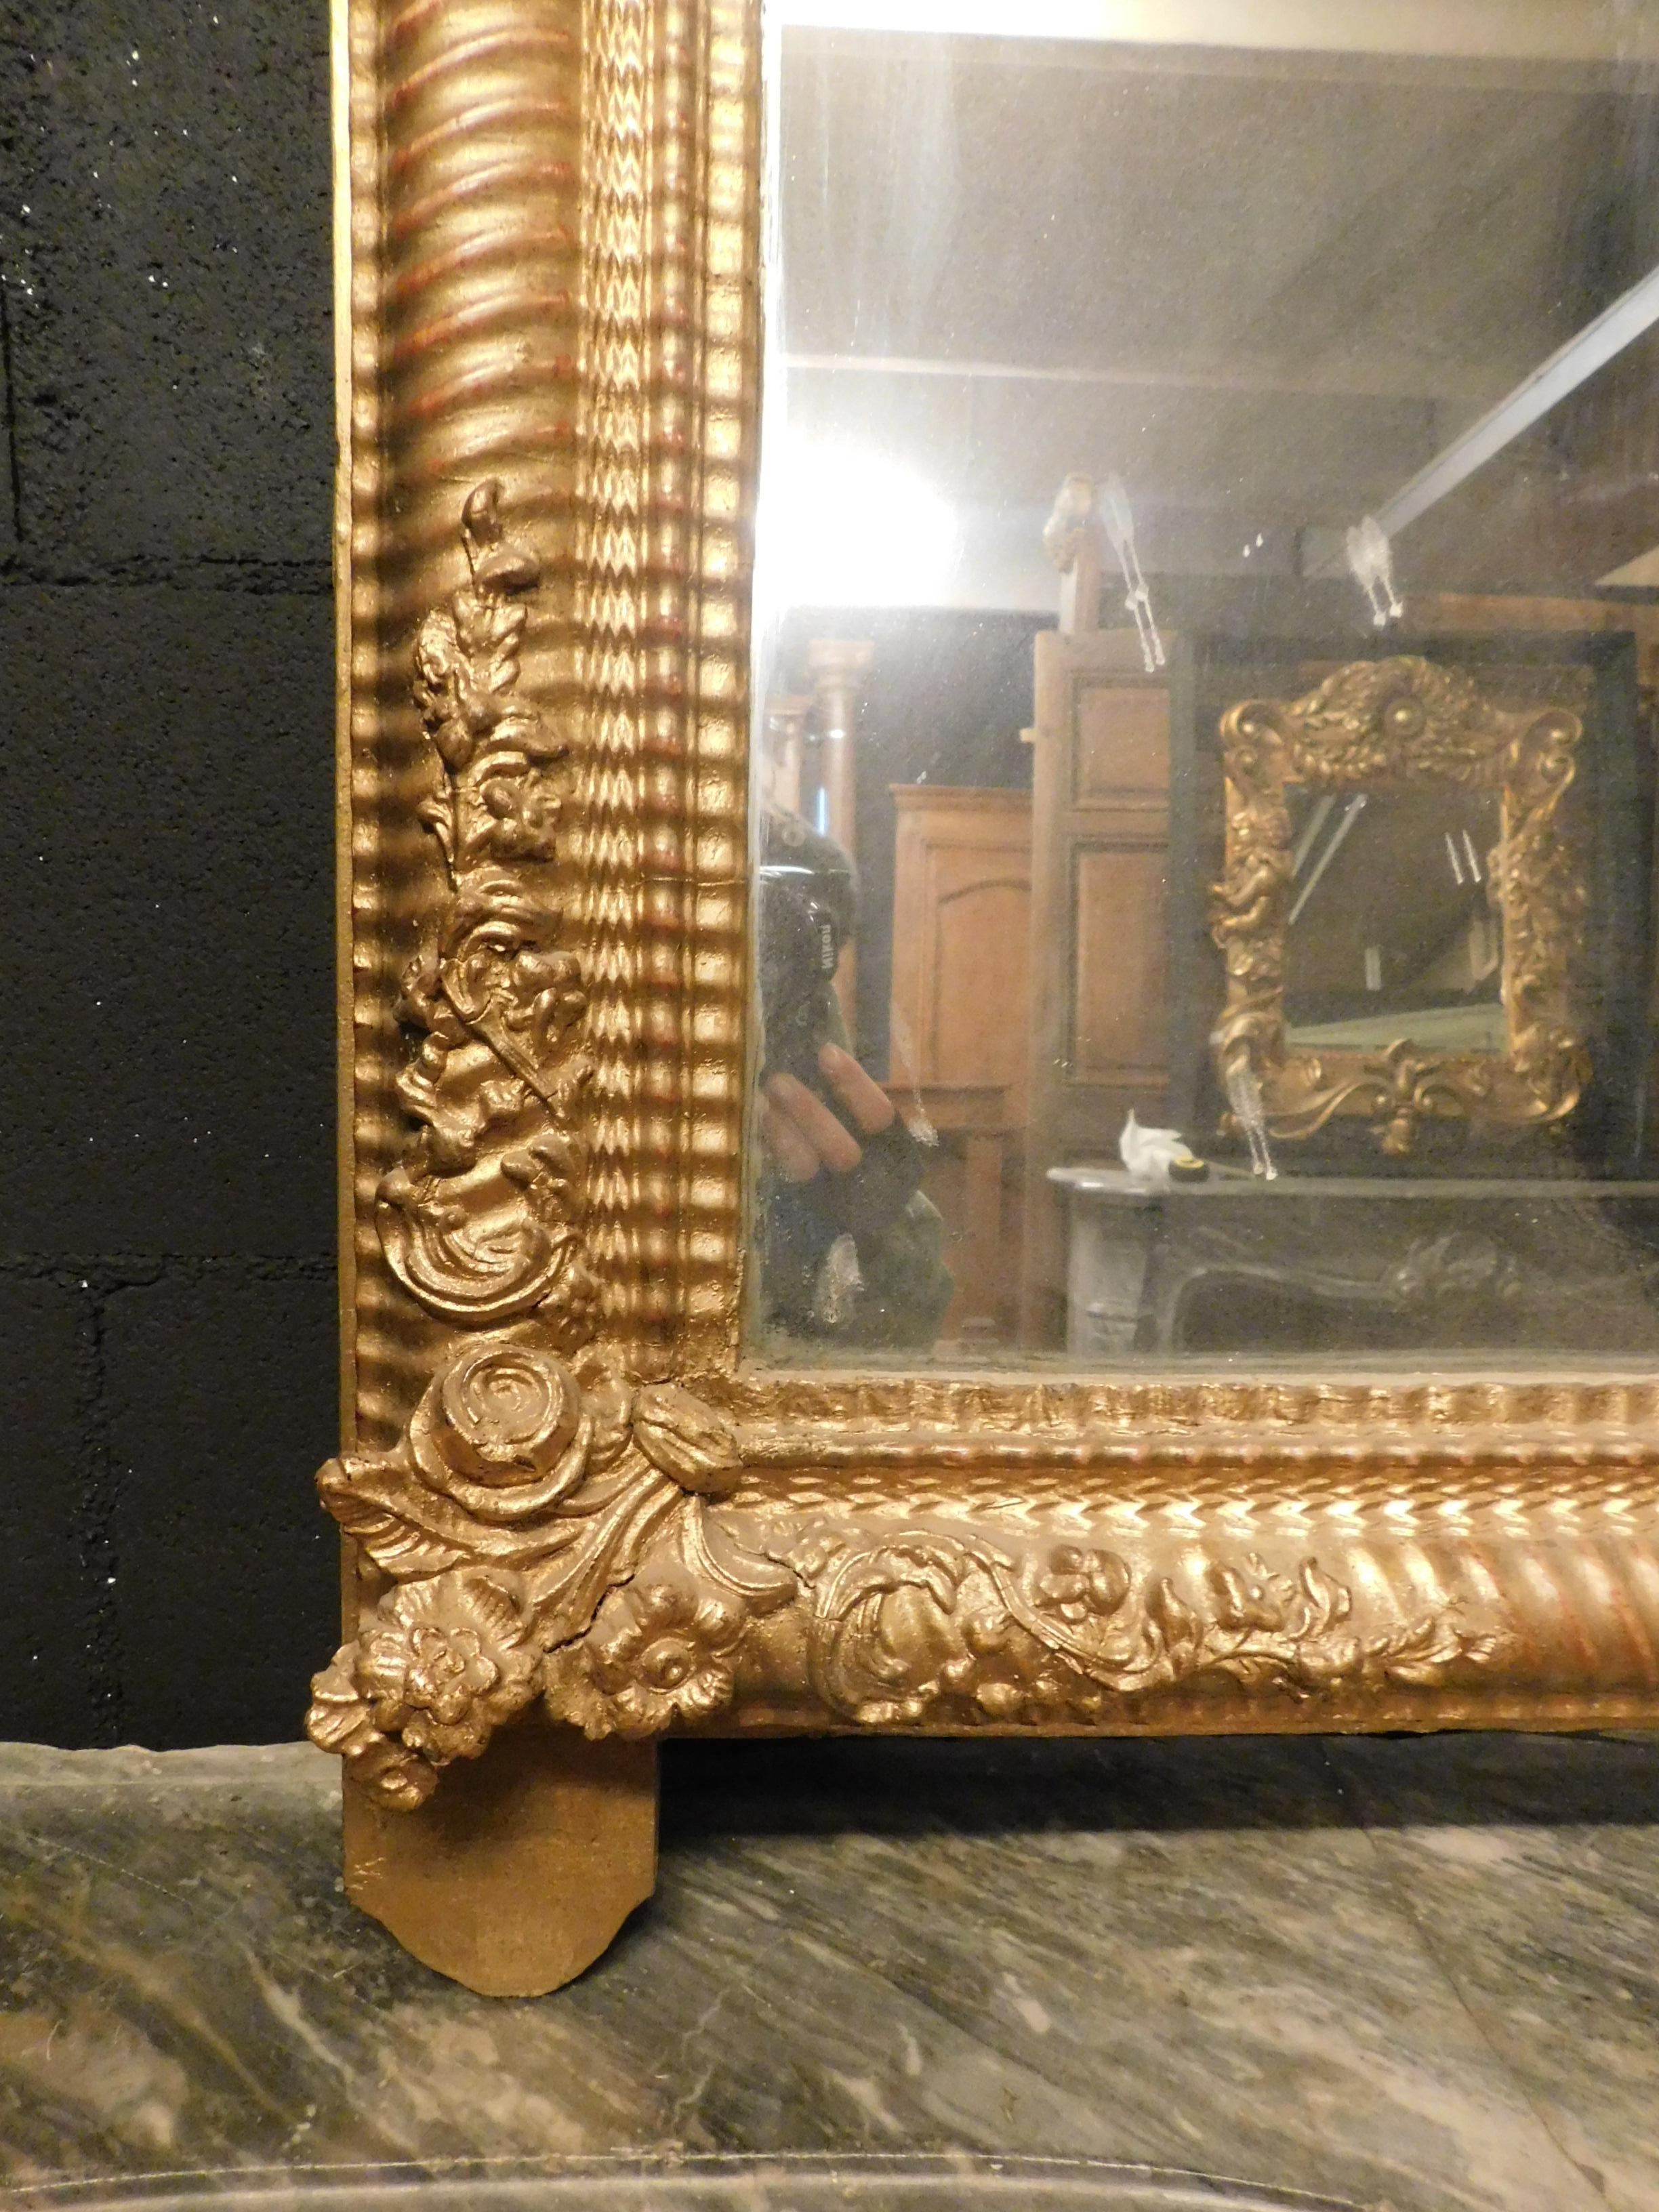 Wood Antique Mirror with Carved and Gilded Rib, Leaves and Frames, 19th Century Italy